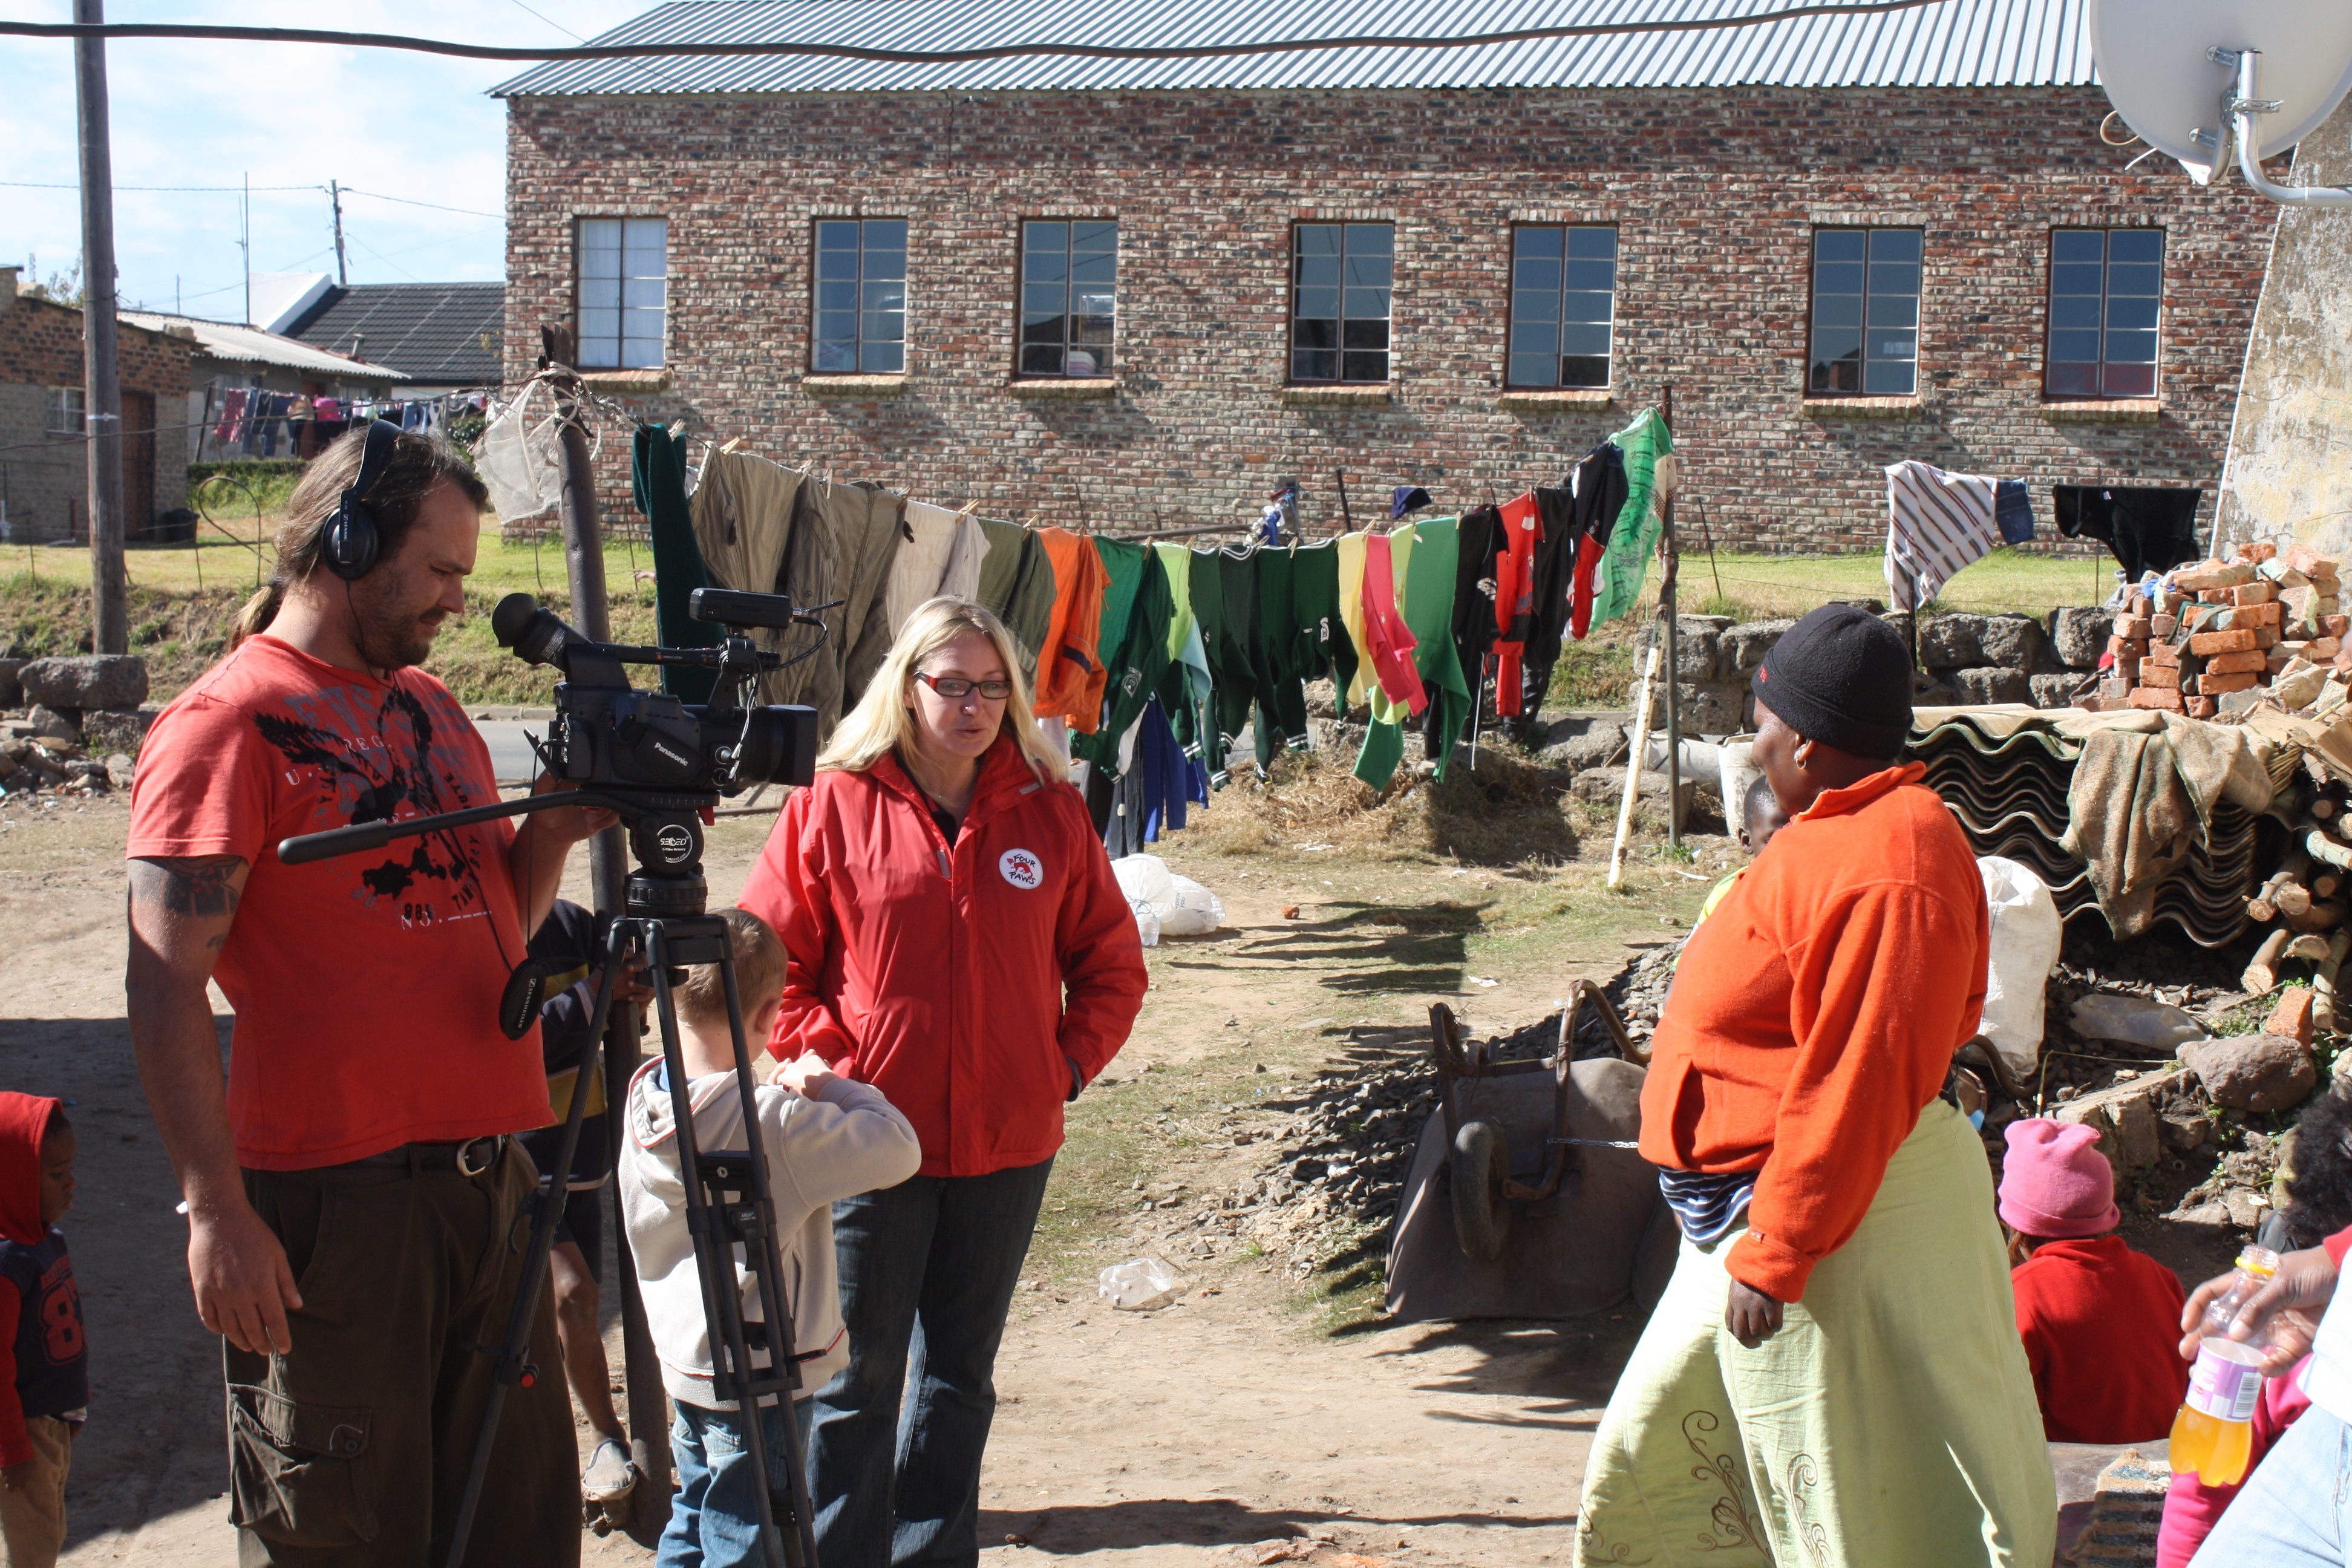 Director of FOUR PAWS in South Africa, Fiona Miles & a film crew